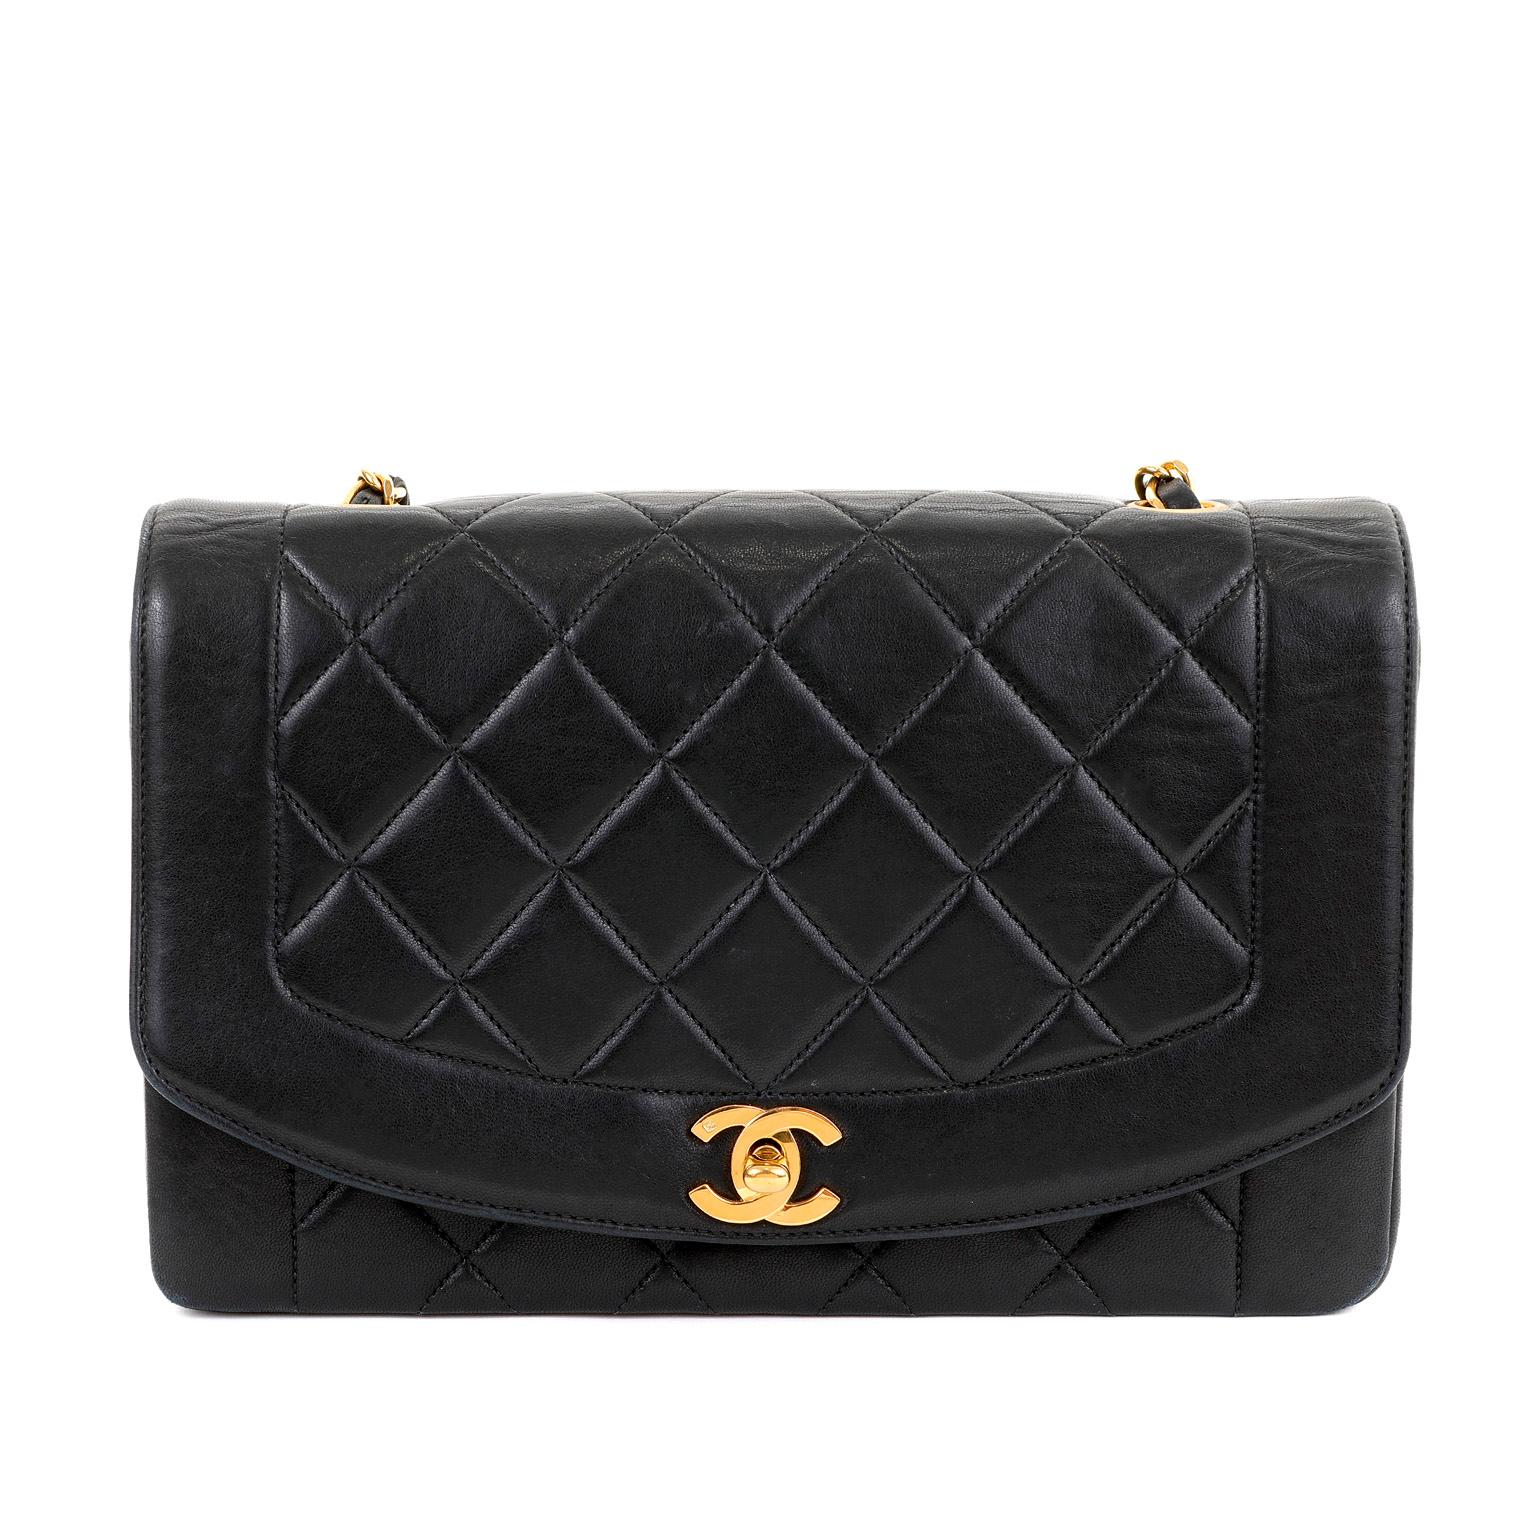 This authentic Chanel Black Lambskin Medium Princess Diana Single Flap Bag is in pristine condition.  A subtly rounded single flap with gold interlocking CC twist lock and smooth frame in supple black lambskin. Leather and chain entwined strap may